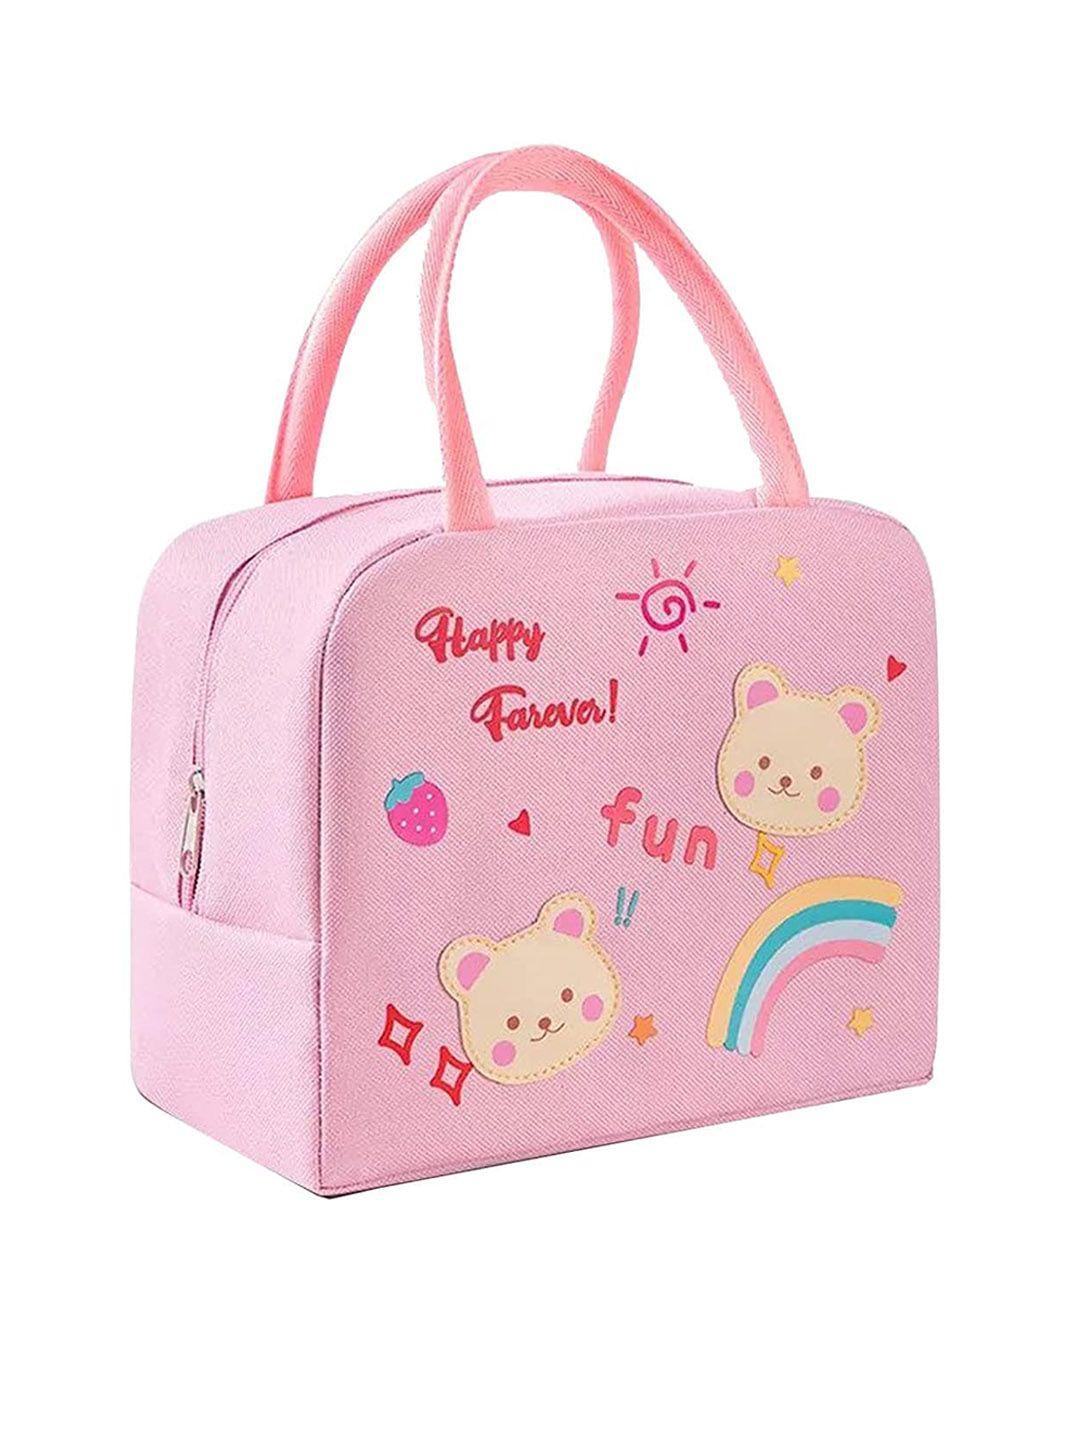 house of quirk pink printed insulated reusable lunch bag